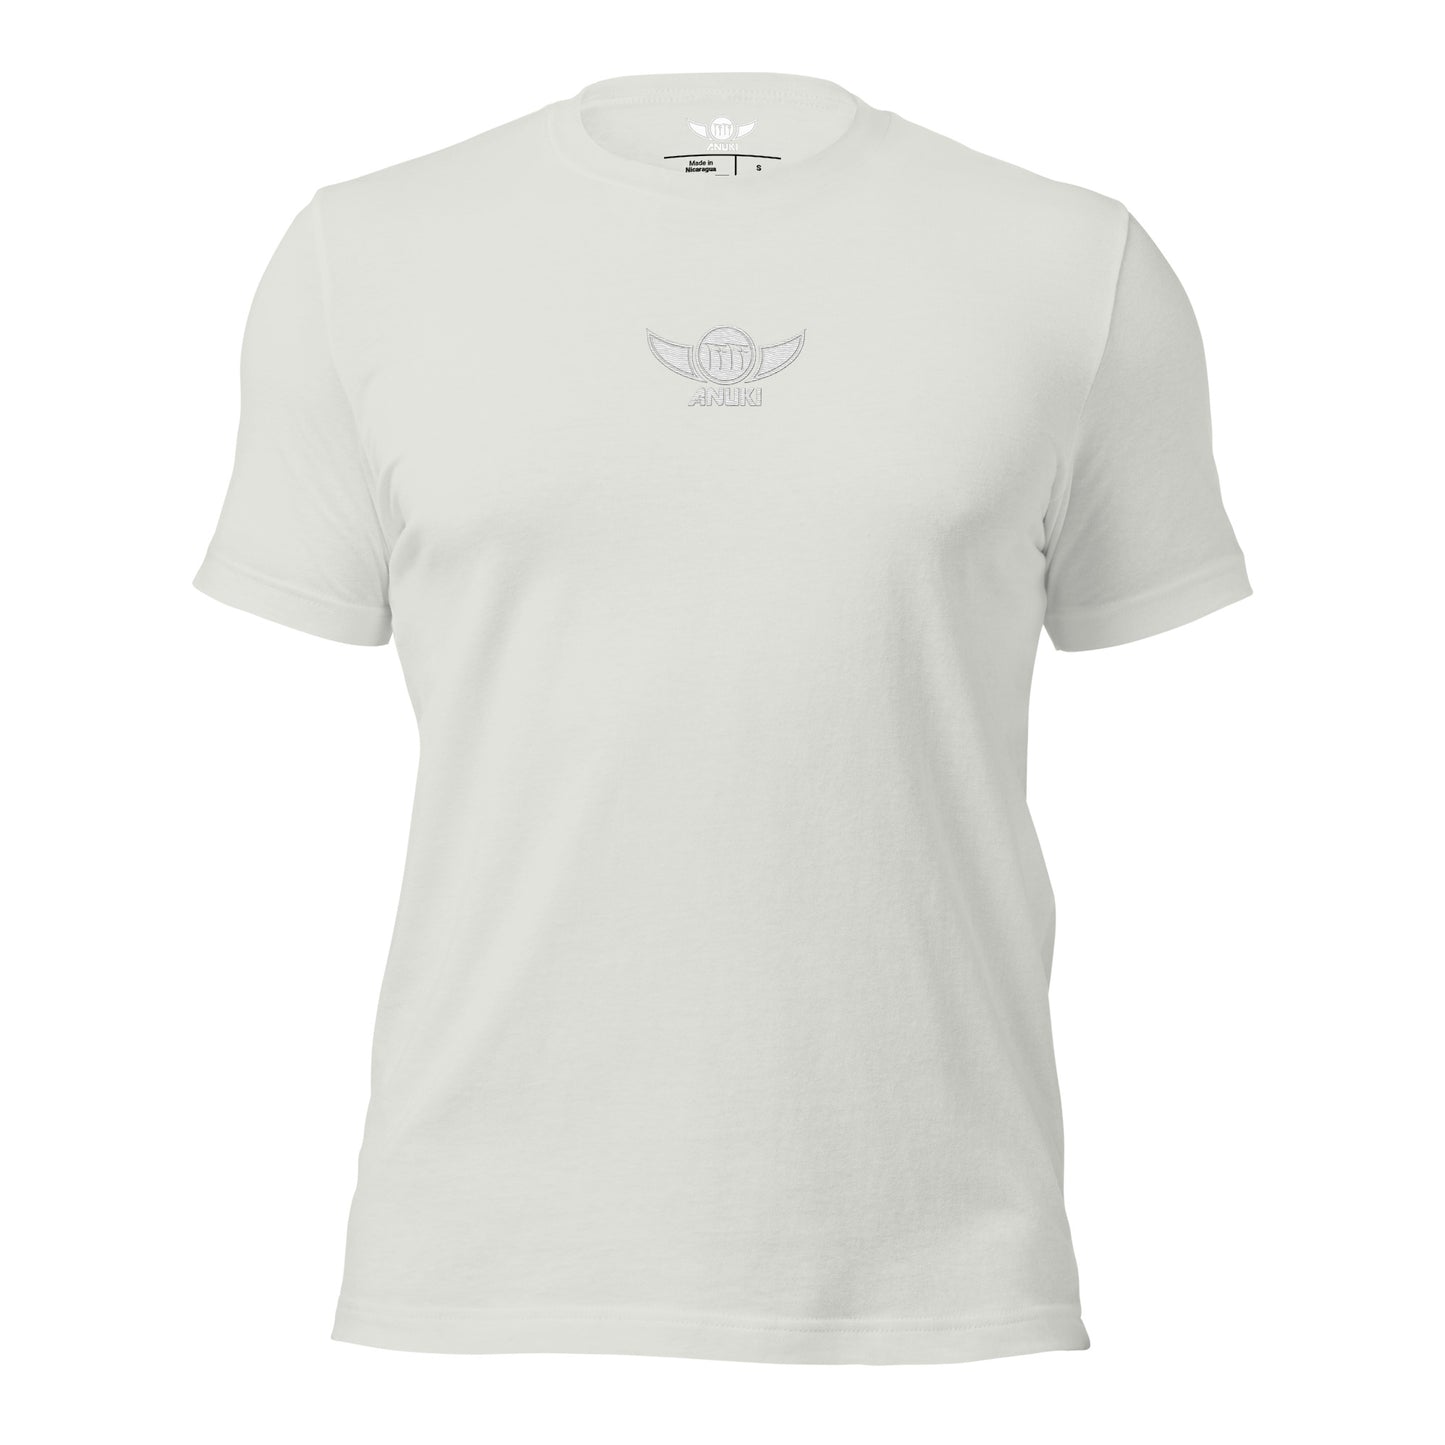 The Deity-Line Centre Logo Embroidered T-Shirt